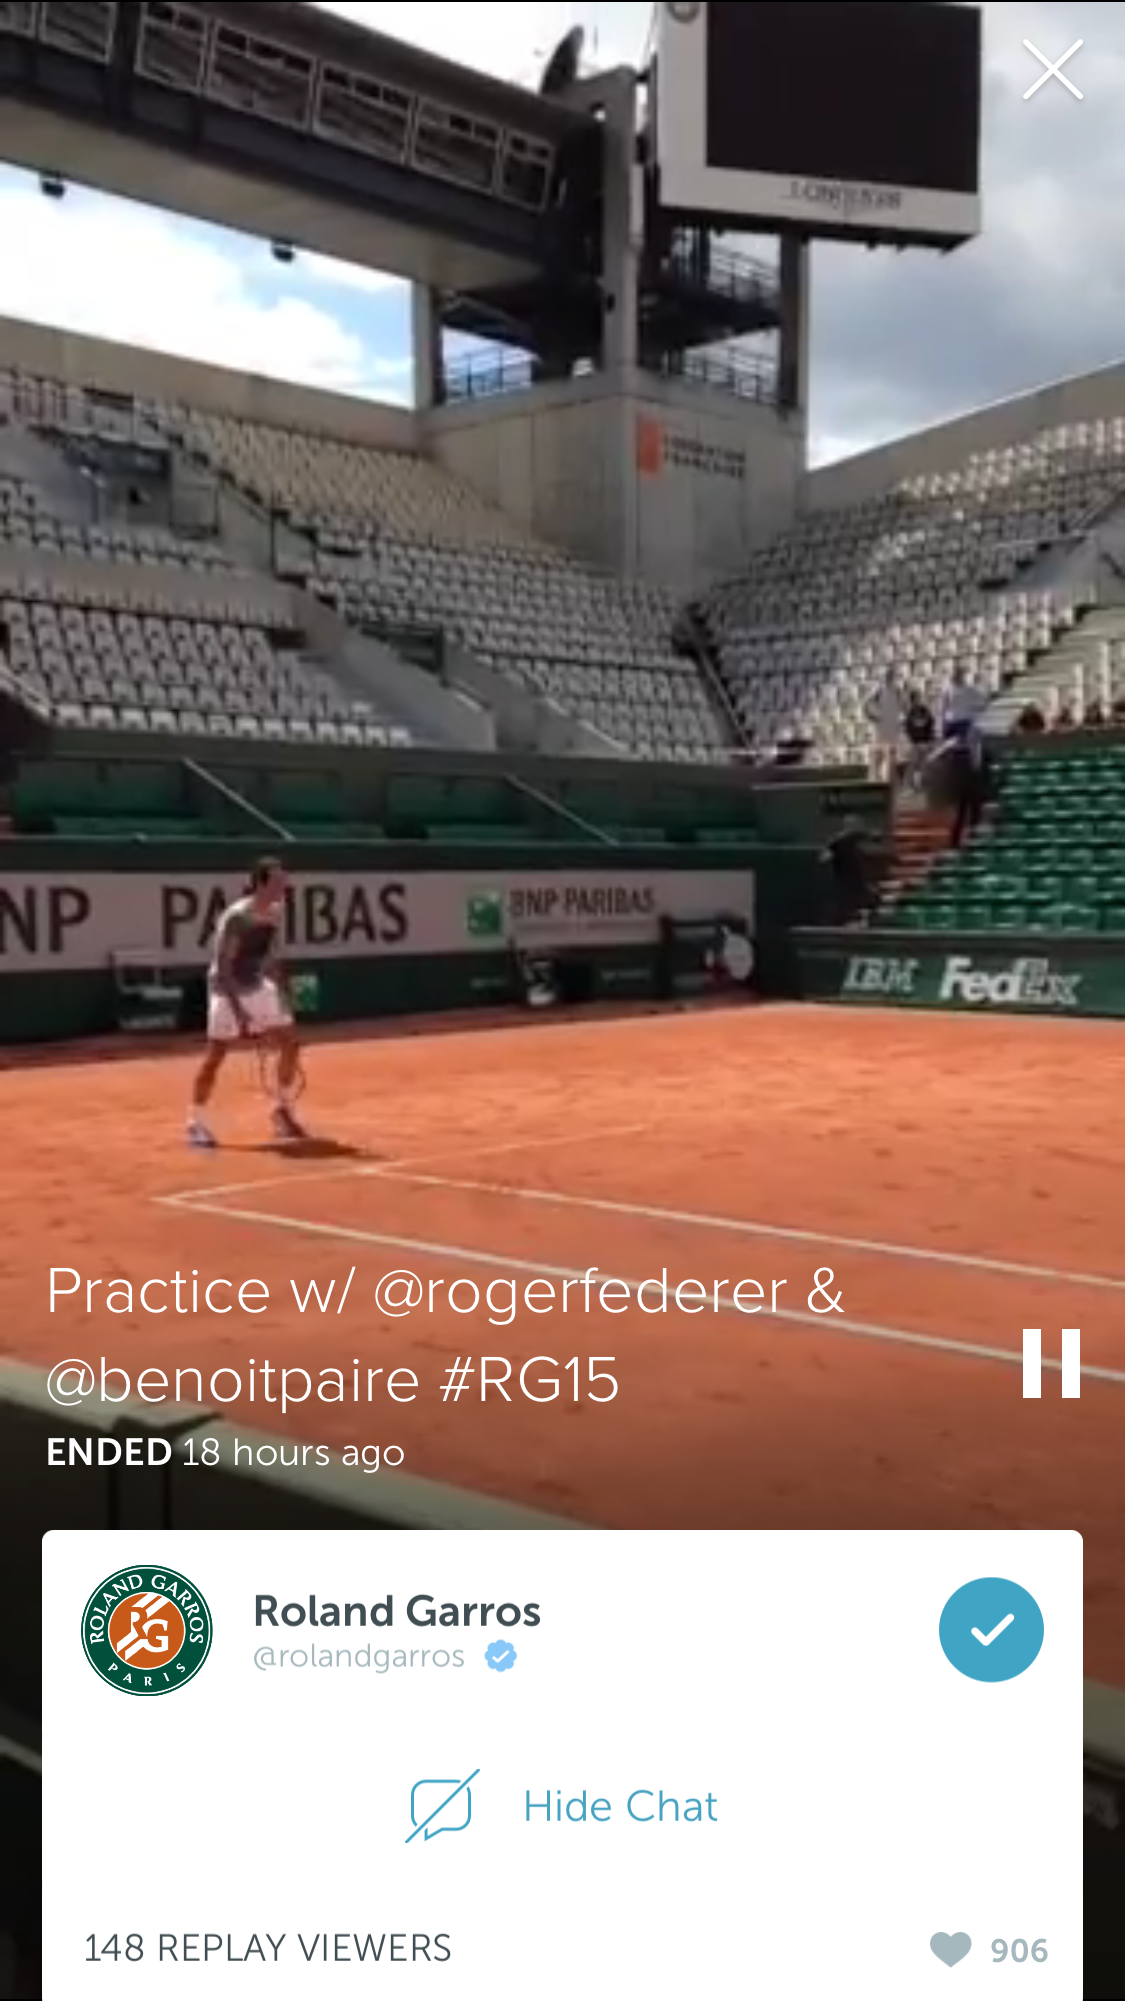 1. Rory McIlroy, “Untitled” 2. Ian Poulter’s “Trying periscope again. Sorry folks still new to this broadcast thing.” 3. Roland Garros’s “Practice w/ @rogerfederer & @benoitpaire #RG15”